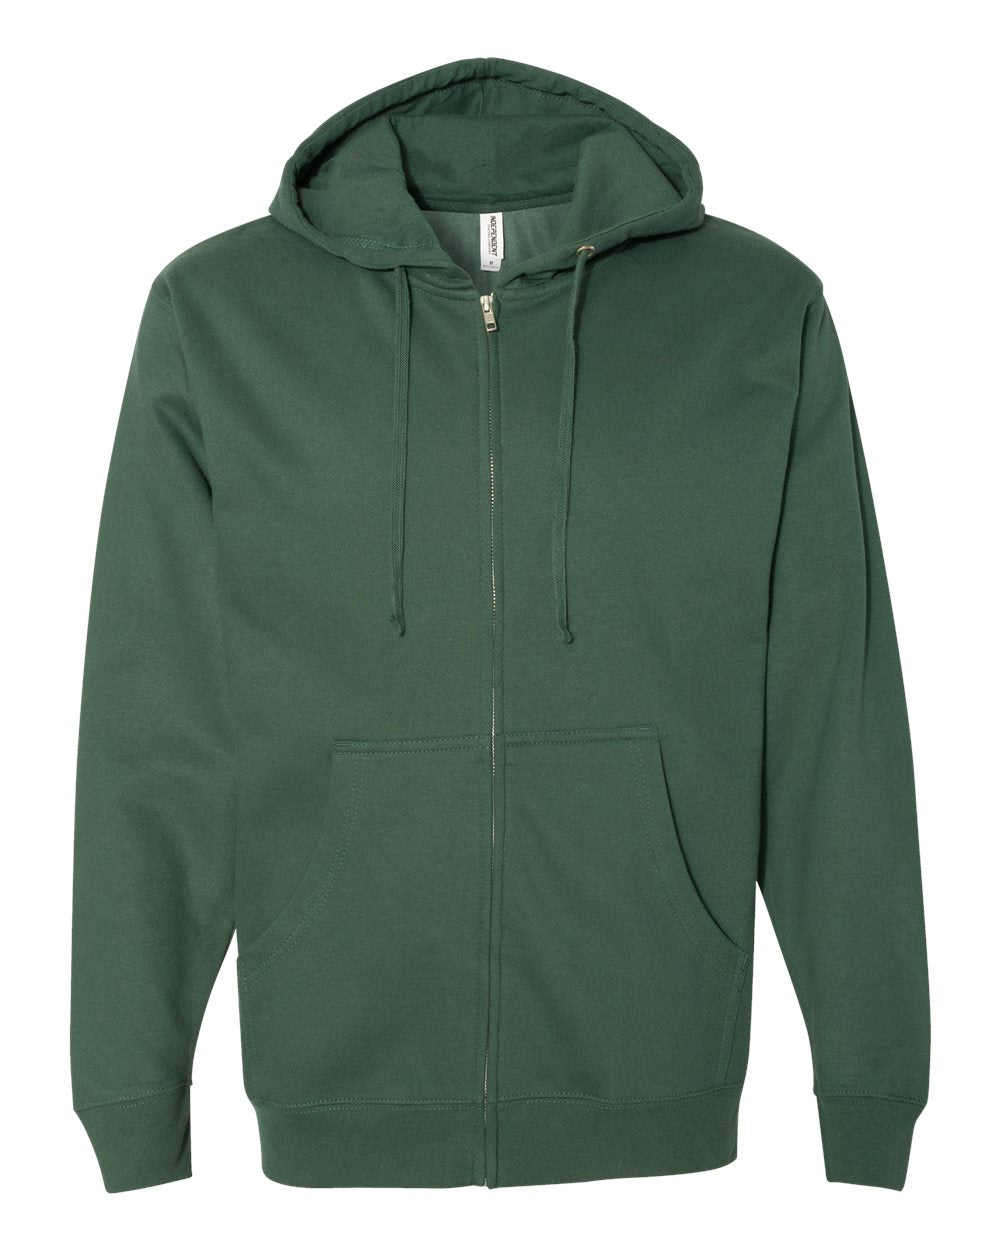 Independent Trading Co. Midweight Full-Zip Hooded Sweatshirt SS4500Z #color_Alpine Green